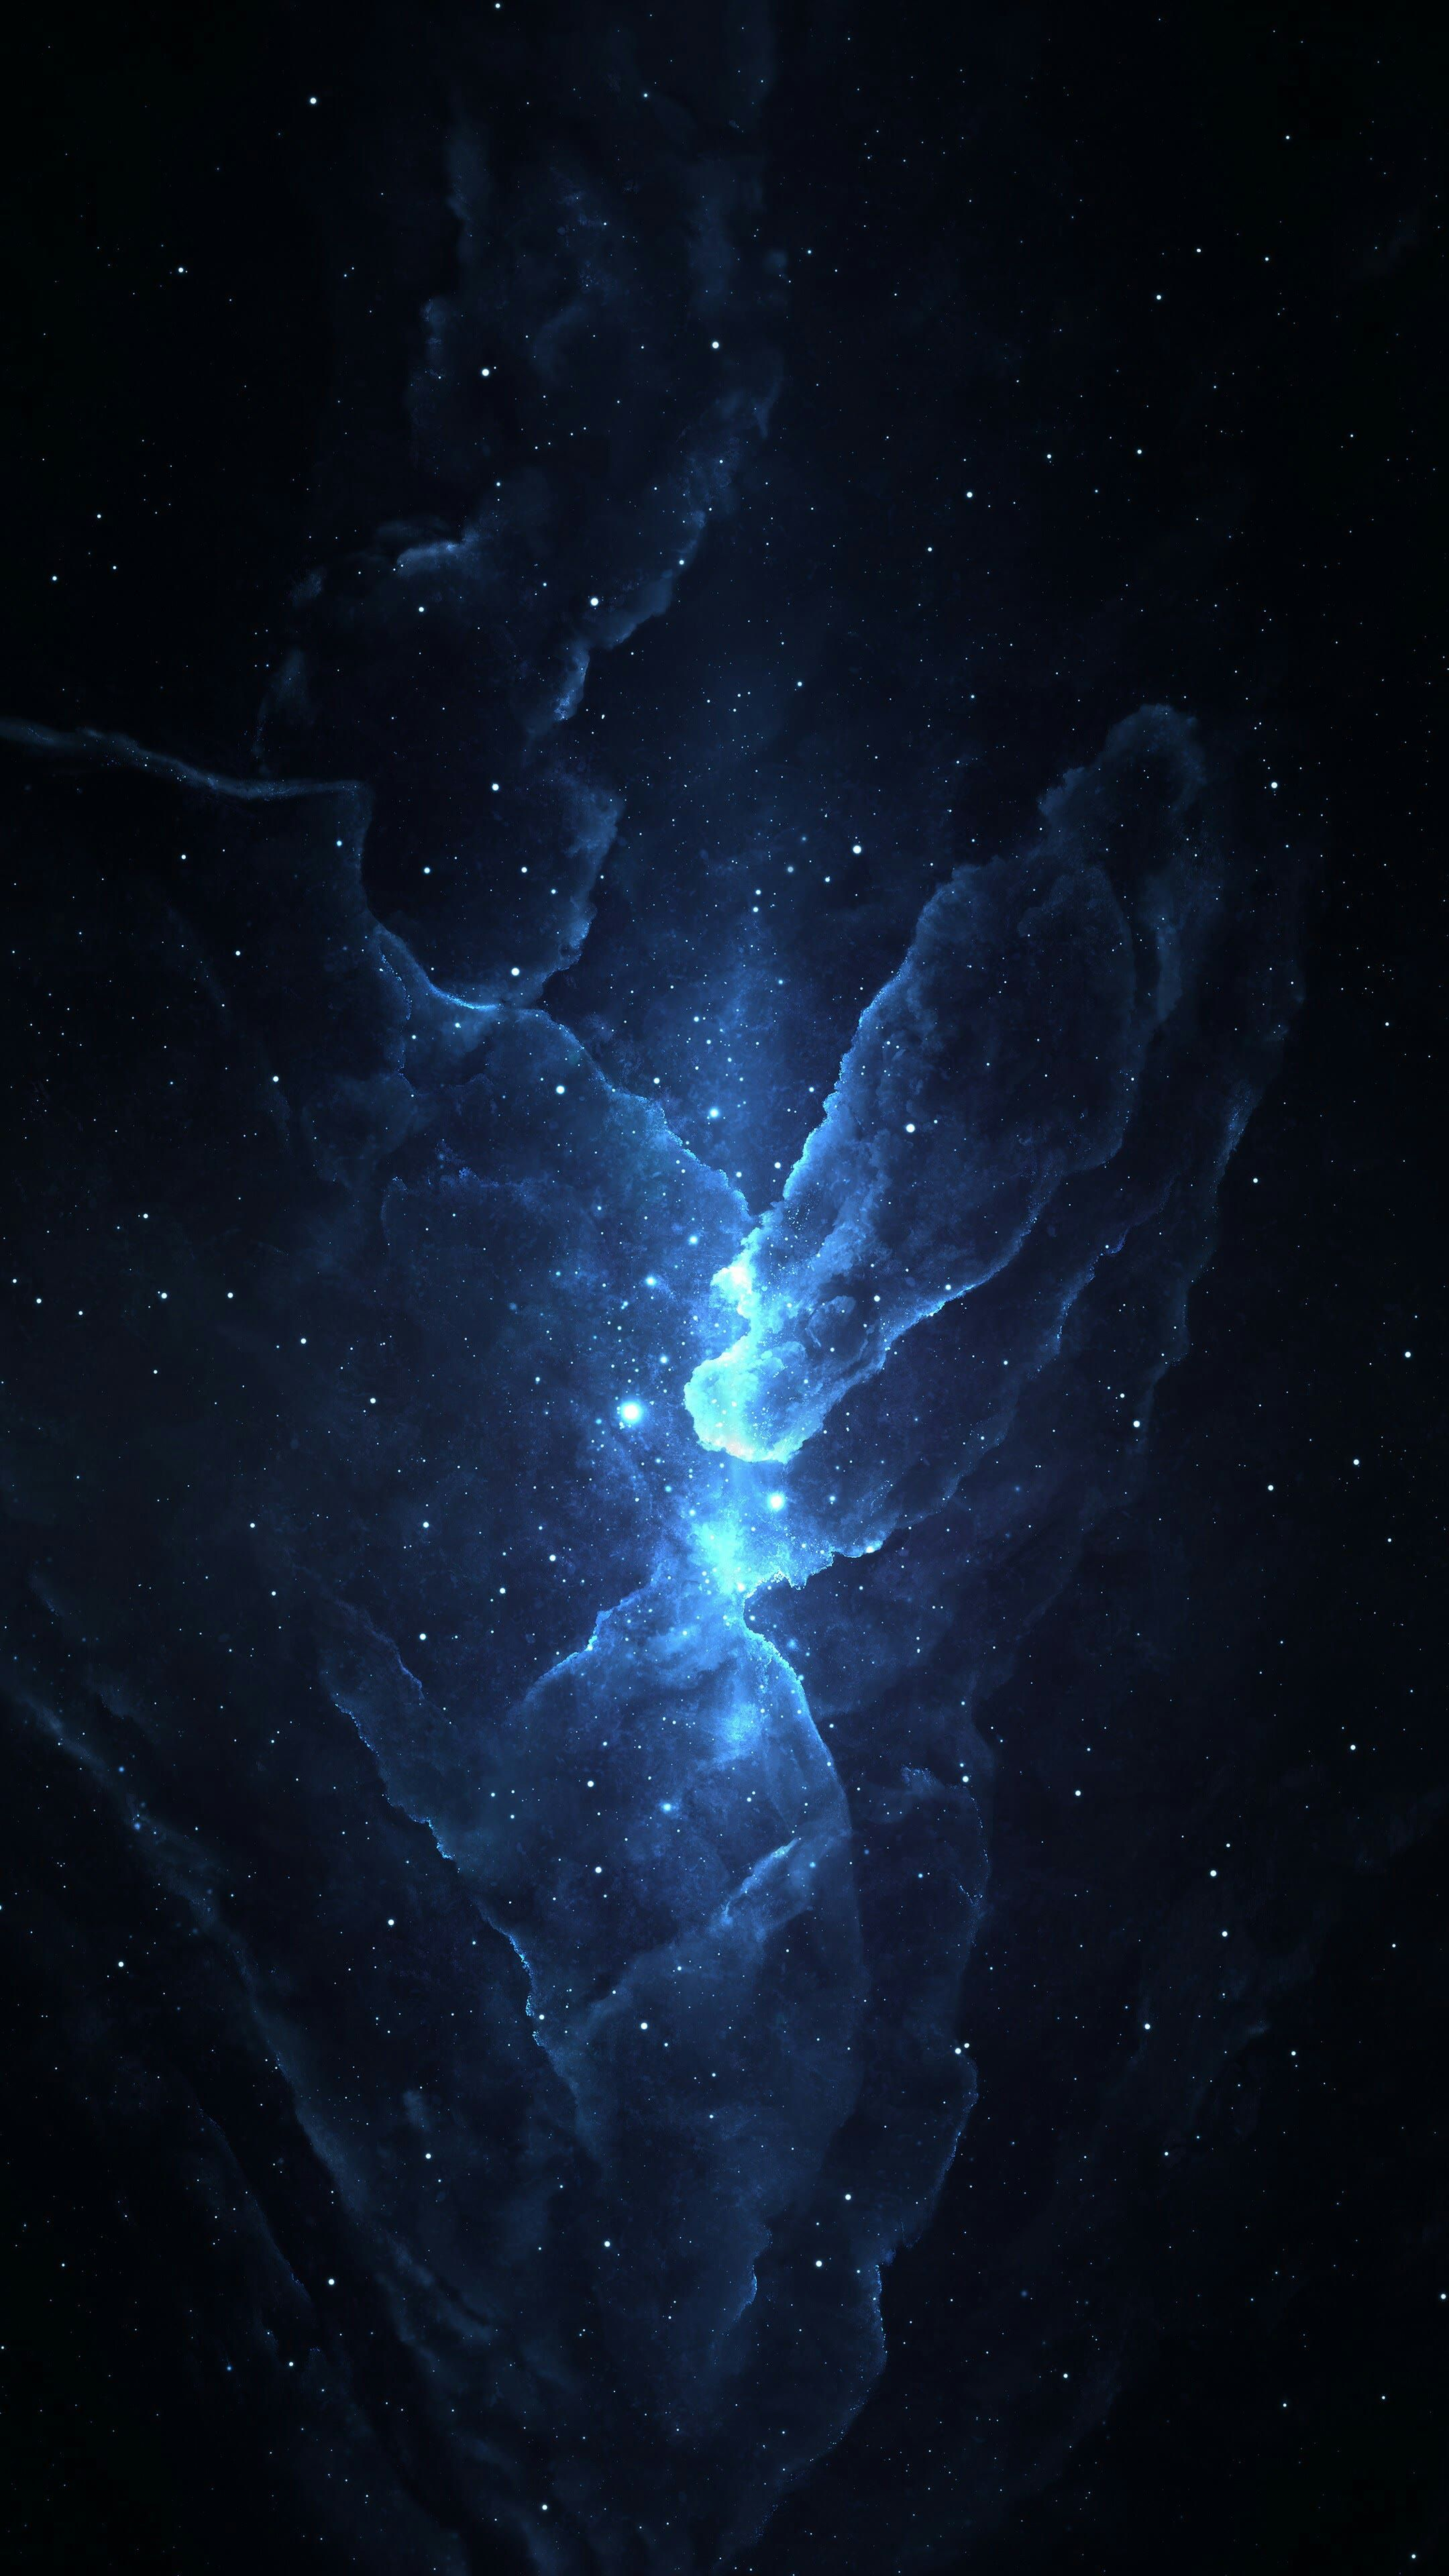 2160x3840 50 Phone Wallpapers (All 4K, No watermarks) | Space iphone wallpaper, Cool wallpapers for phones, 4k phone wallpapers